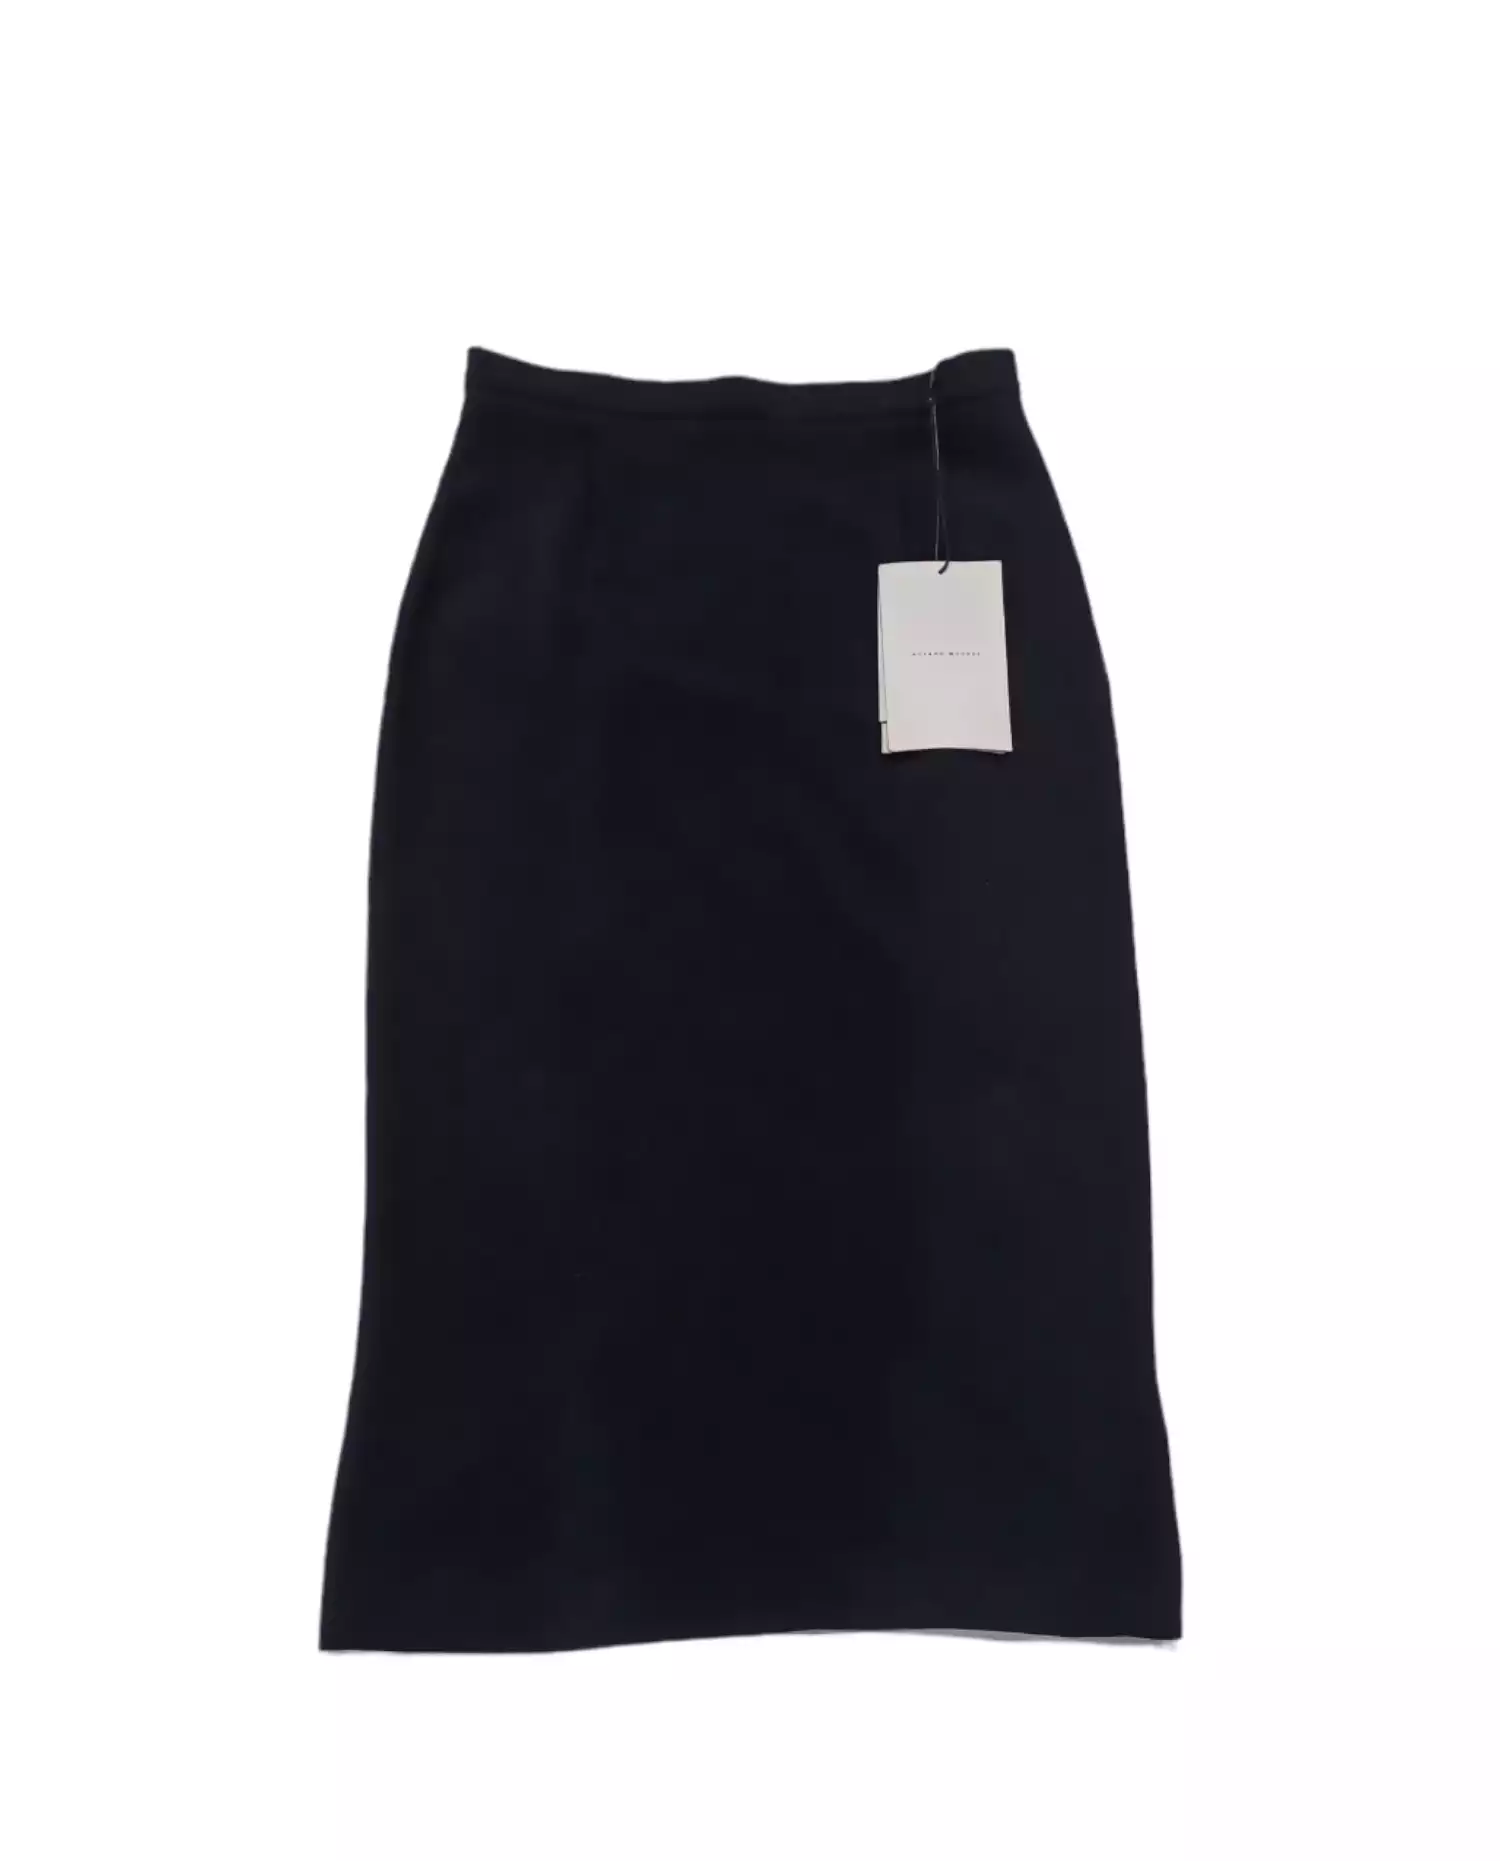 Skirt by Roland Mouret